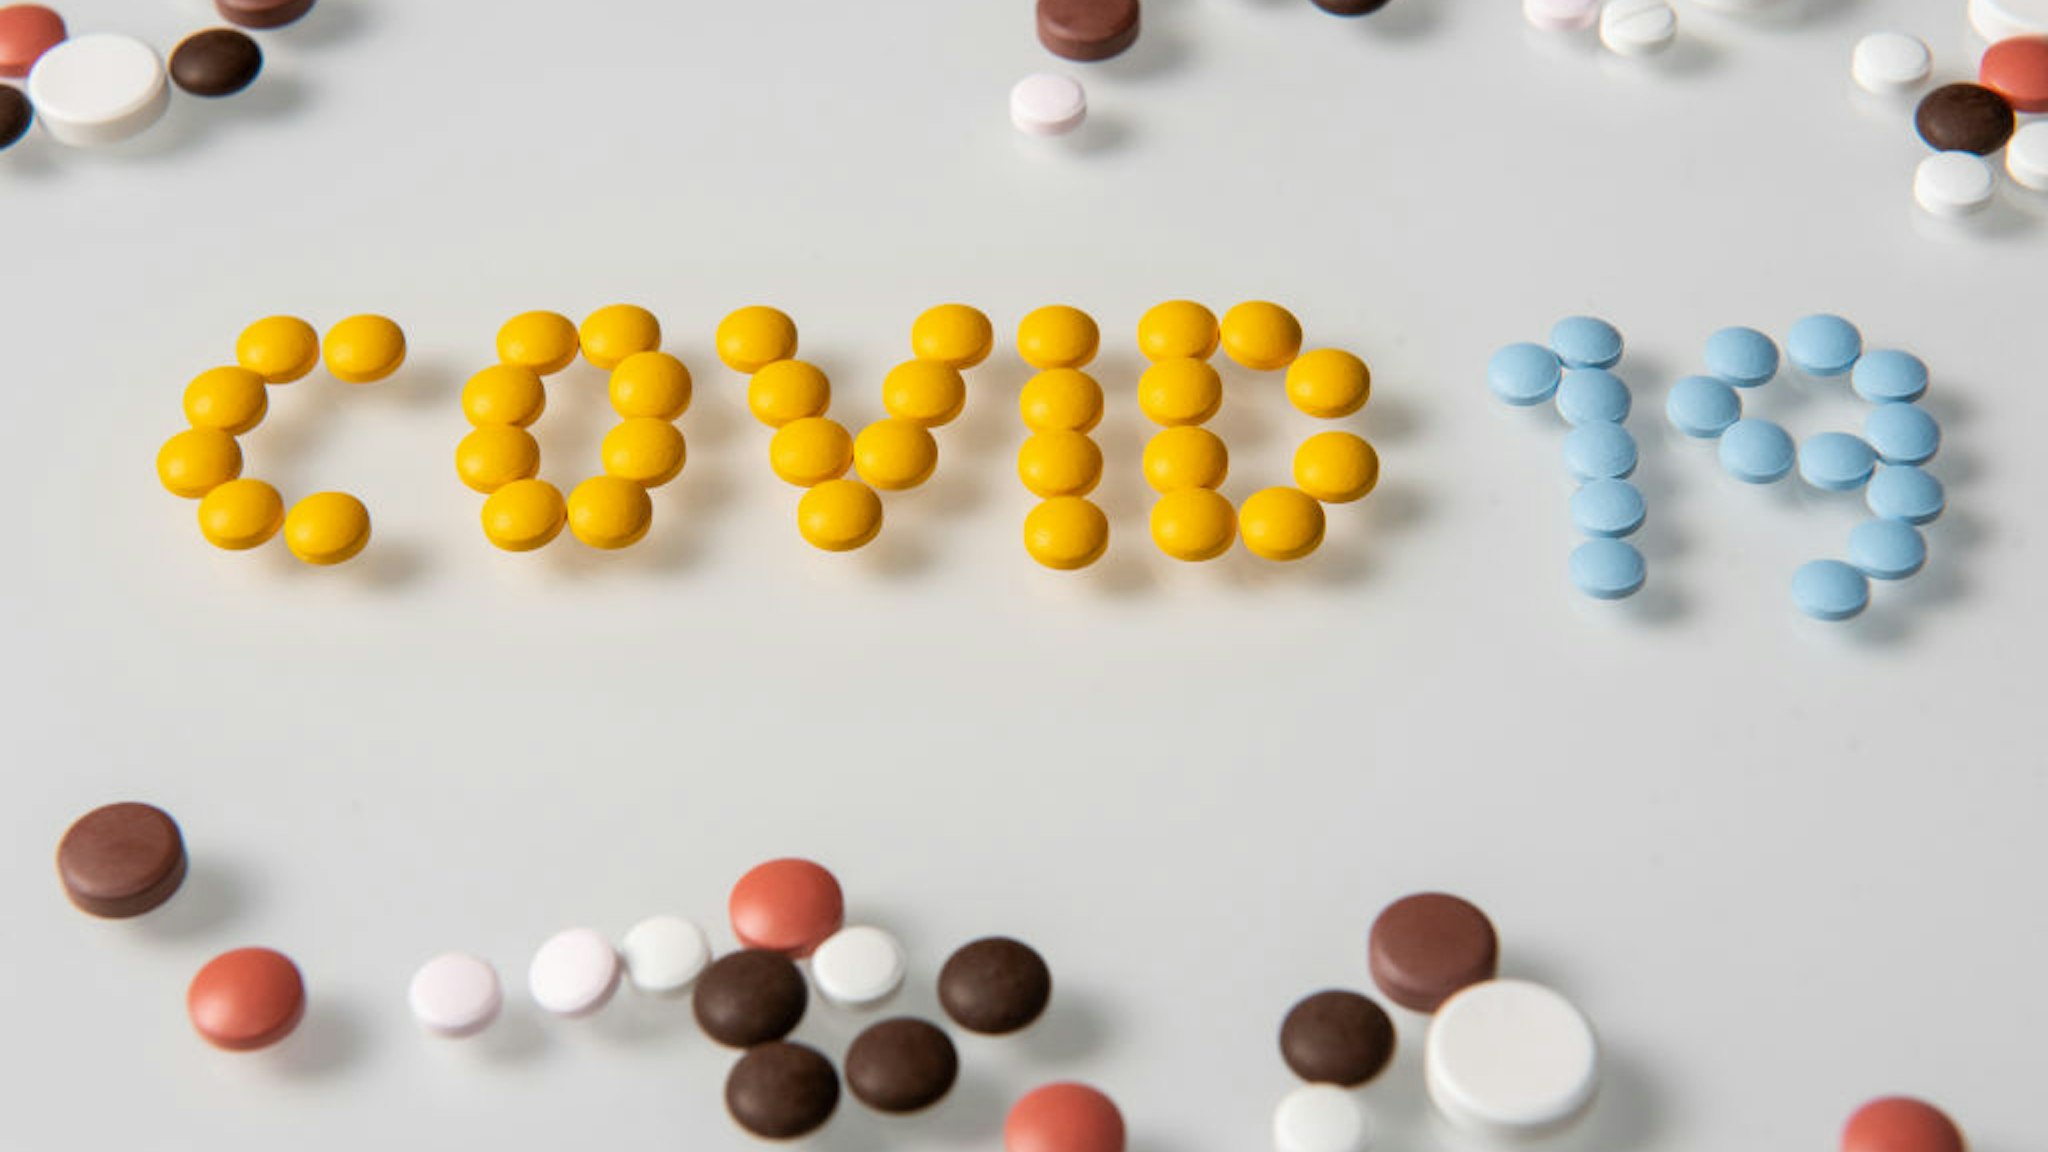 SLOVENIA - 2020/02/24: In this photo illustration, Covid-19 written with pills seen displayed. (Photo Illustration by Milos Vujinovic/SOPA Images/LightRocket via Getty Images)